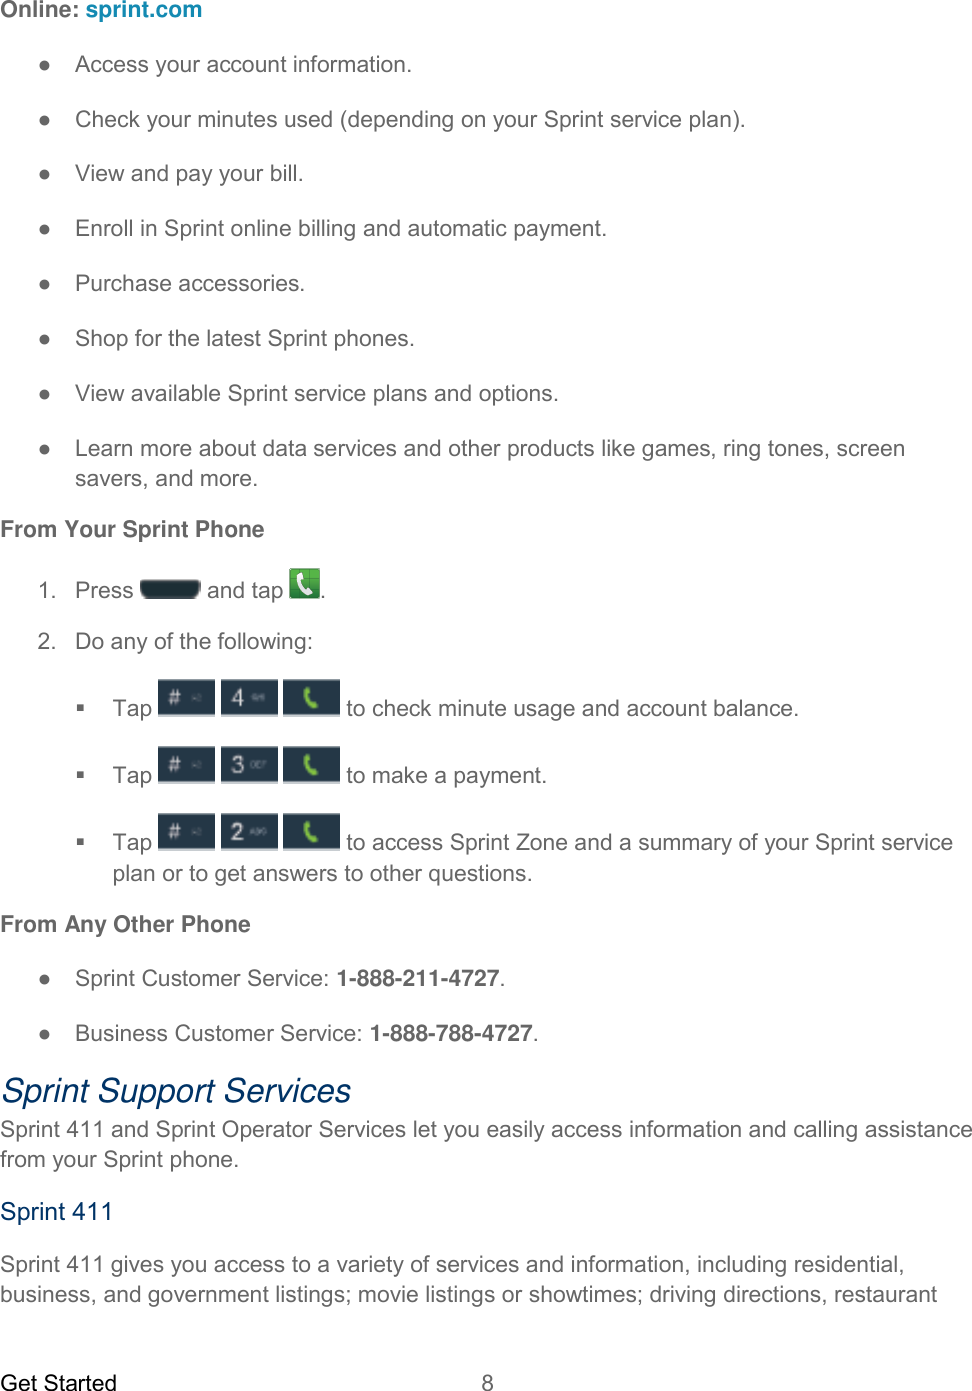 Get Started  8   Online: sprint.com ●  Access your account information. ●  Check your minutes used (depending on your Sprint service plan). ●  View and pay your bill. ●  Enroll in Sprint online billing and automatic payment. ●  Purchase accessories. ● Shop for the latest Sprint phones. ●  View available Sprint service plans and options. ●  Learn more about data services and other products like games, ring tones, screen savers, and more. From Your Sprint Phone 1.  Press  and tap  .  2.  Do any of the following:   Tap      to check minute usage and account balance.   Tap       to make a payment.   Tap      to access Sprint Zone and a summary of your Sprint service plan or to get answers to other questions. From Any Other Phone ●  Sprint Customer Service: 1-888-211-4727. ●  Business Customer Service: 1-888-788-4727. Sprint Support Services Sprint 411 and Sprint Operator Services let you easily access information and calling assistance from your Sprint phone. Sprint 411 Sprint 411 gives you access to a variety of services and information, including residential, business, and government listings; movie listings or showtimes; driving directions, restaurant 